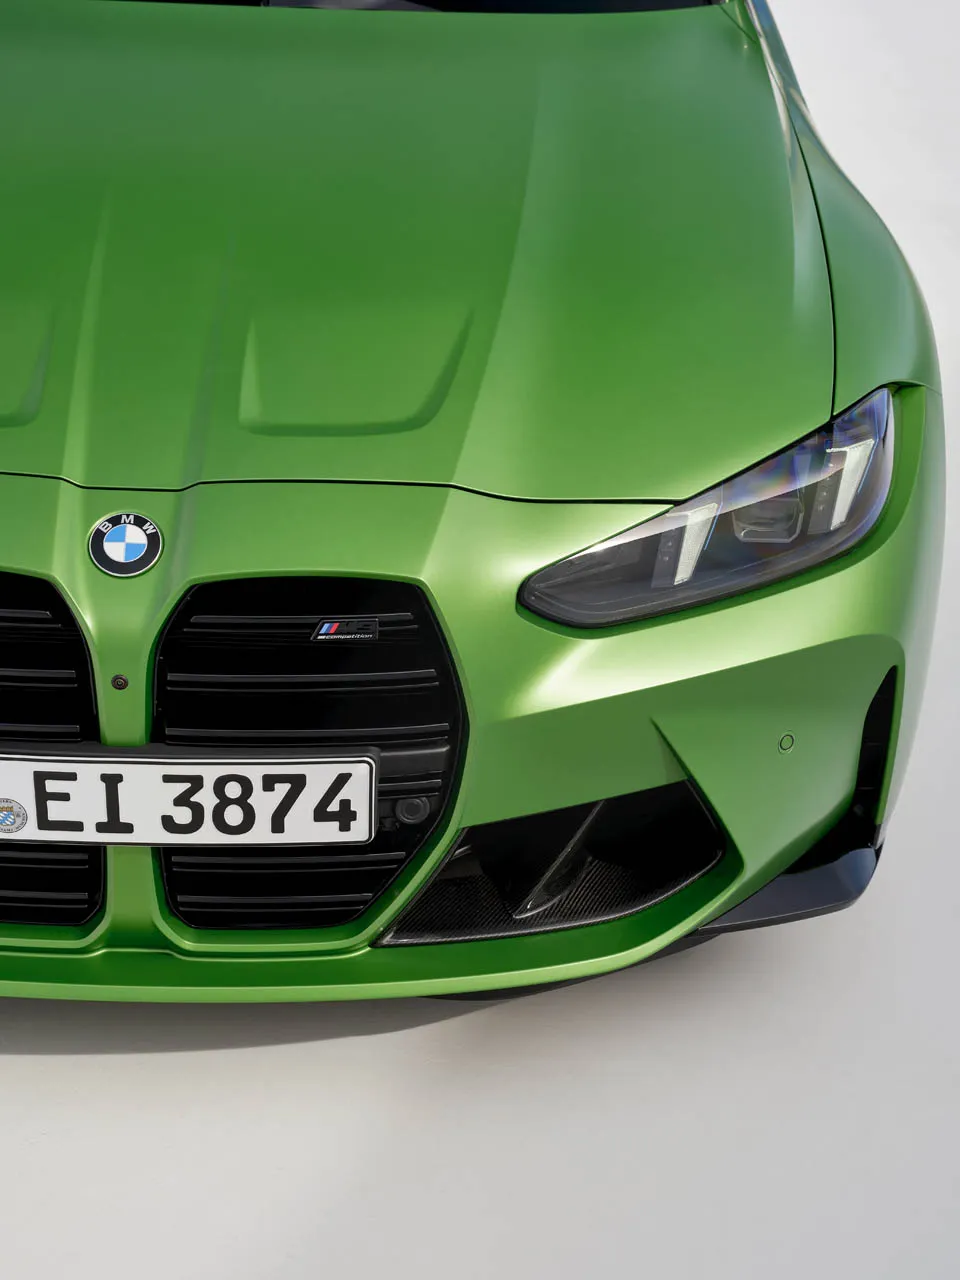 The BMW M Ev will focus on the show, not on the go, so forget the tank turn